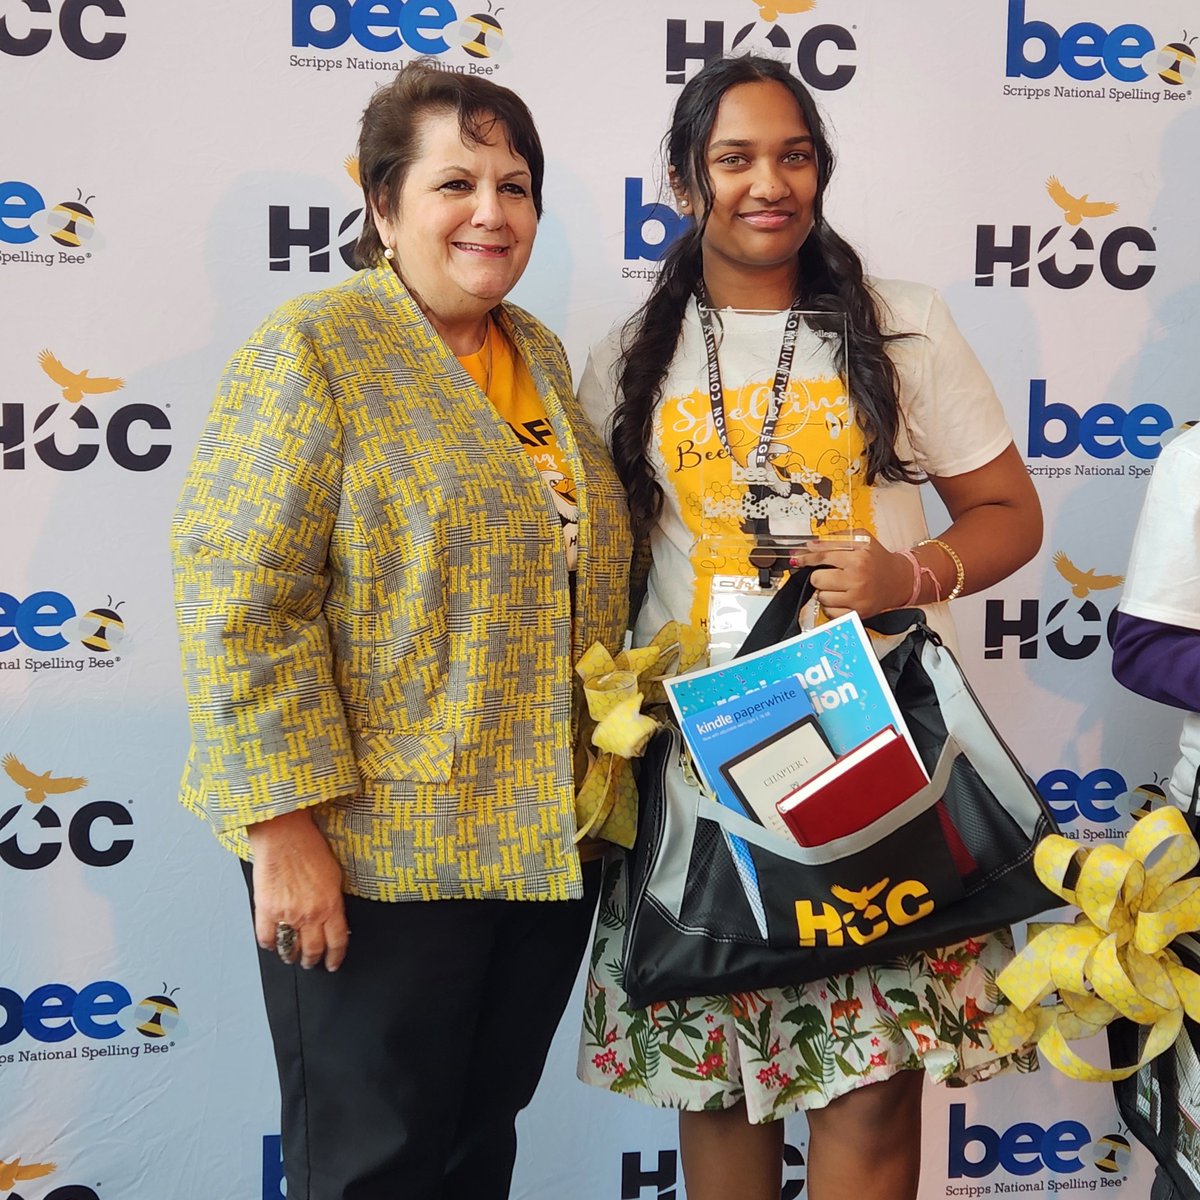 CONGRATULATIONS to @TISDCPJHS 8th grader Ishika Varipilli on capturing 1st place at the Houston Regional Spelling Bee to advance to her third straight @ScrippsBee! She captured 1st after 8 rounds with the winning word: 'scrannel'.